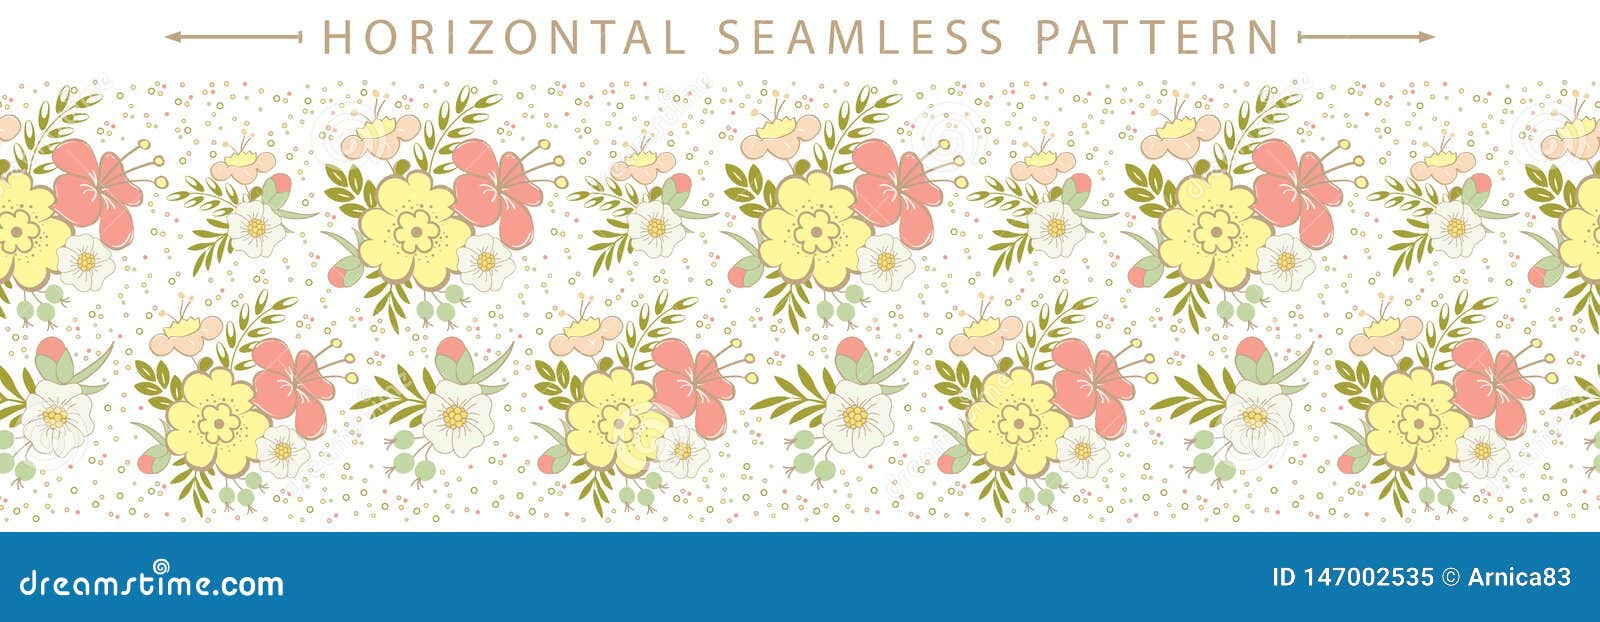 Download Vector Horizontal Seamless Border With Beautiful Floral ...